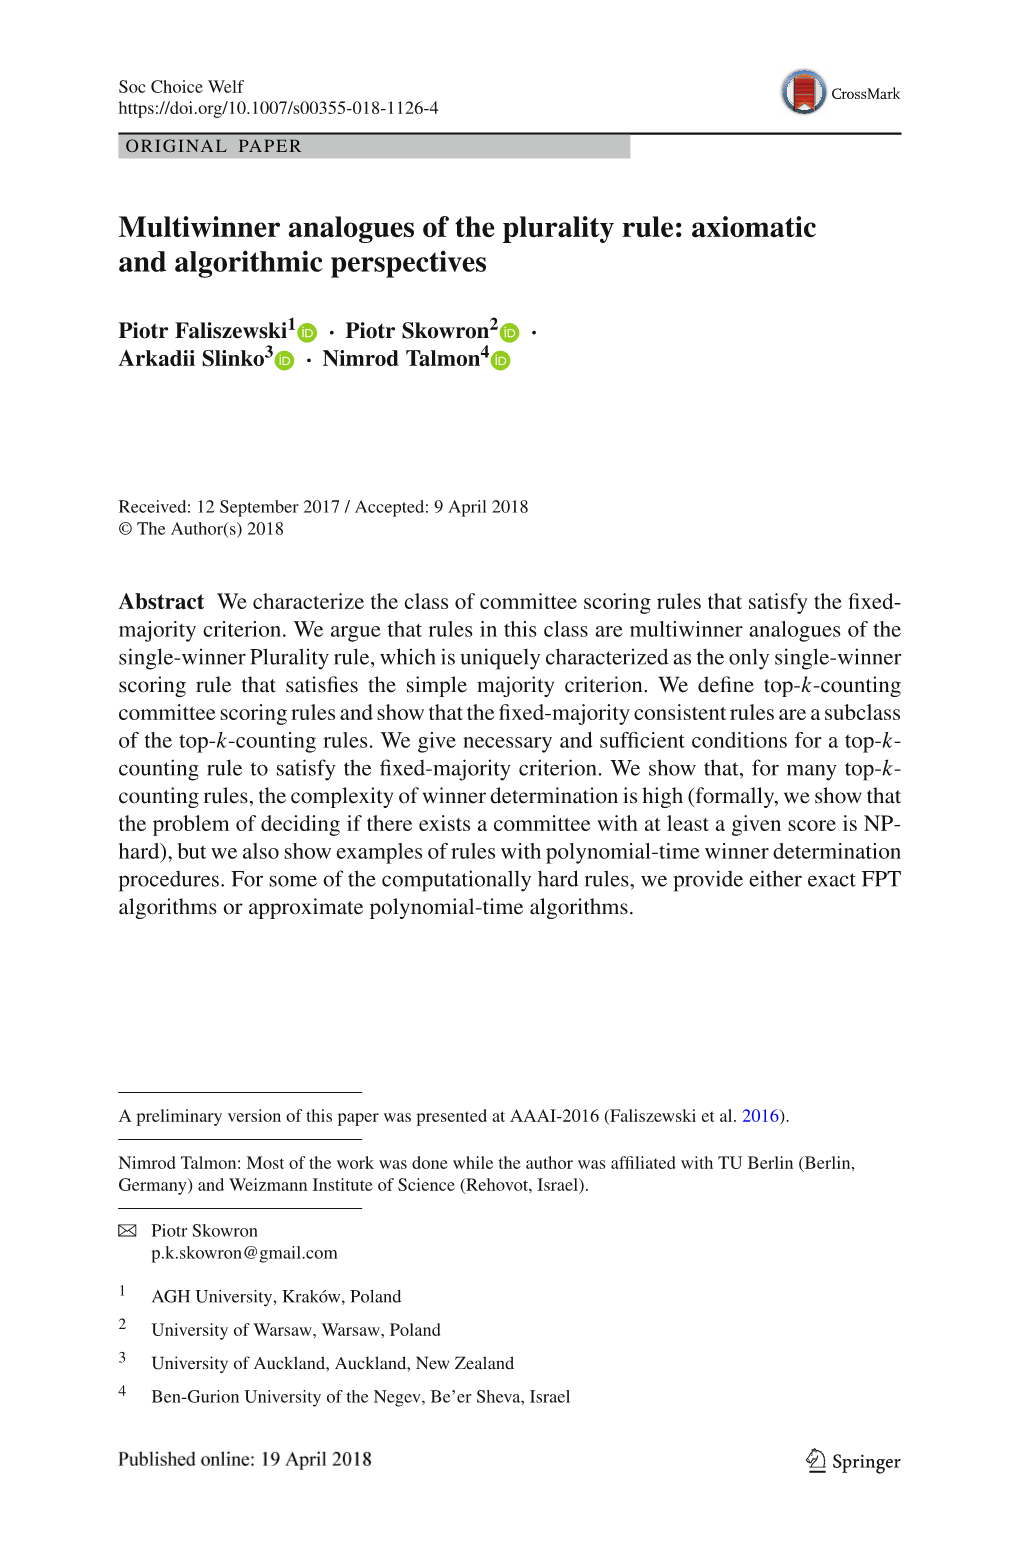 Multiwinner Analogues of the Plurality Rule: Axiomatic and Algorithmic Perspectives